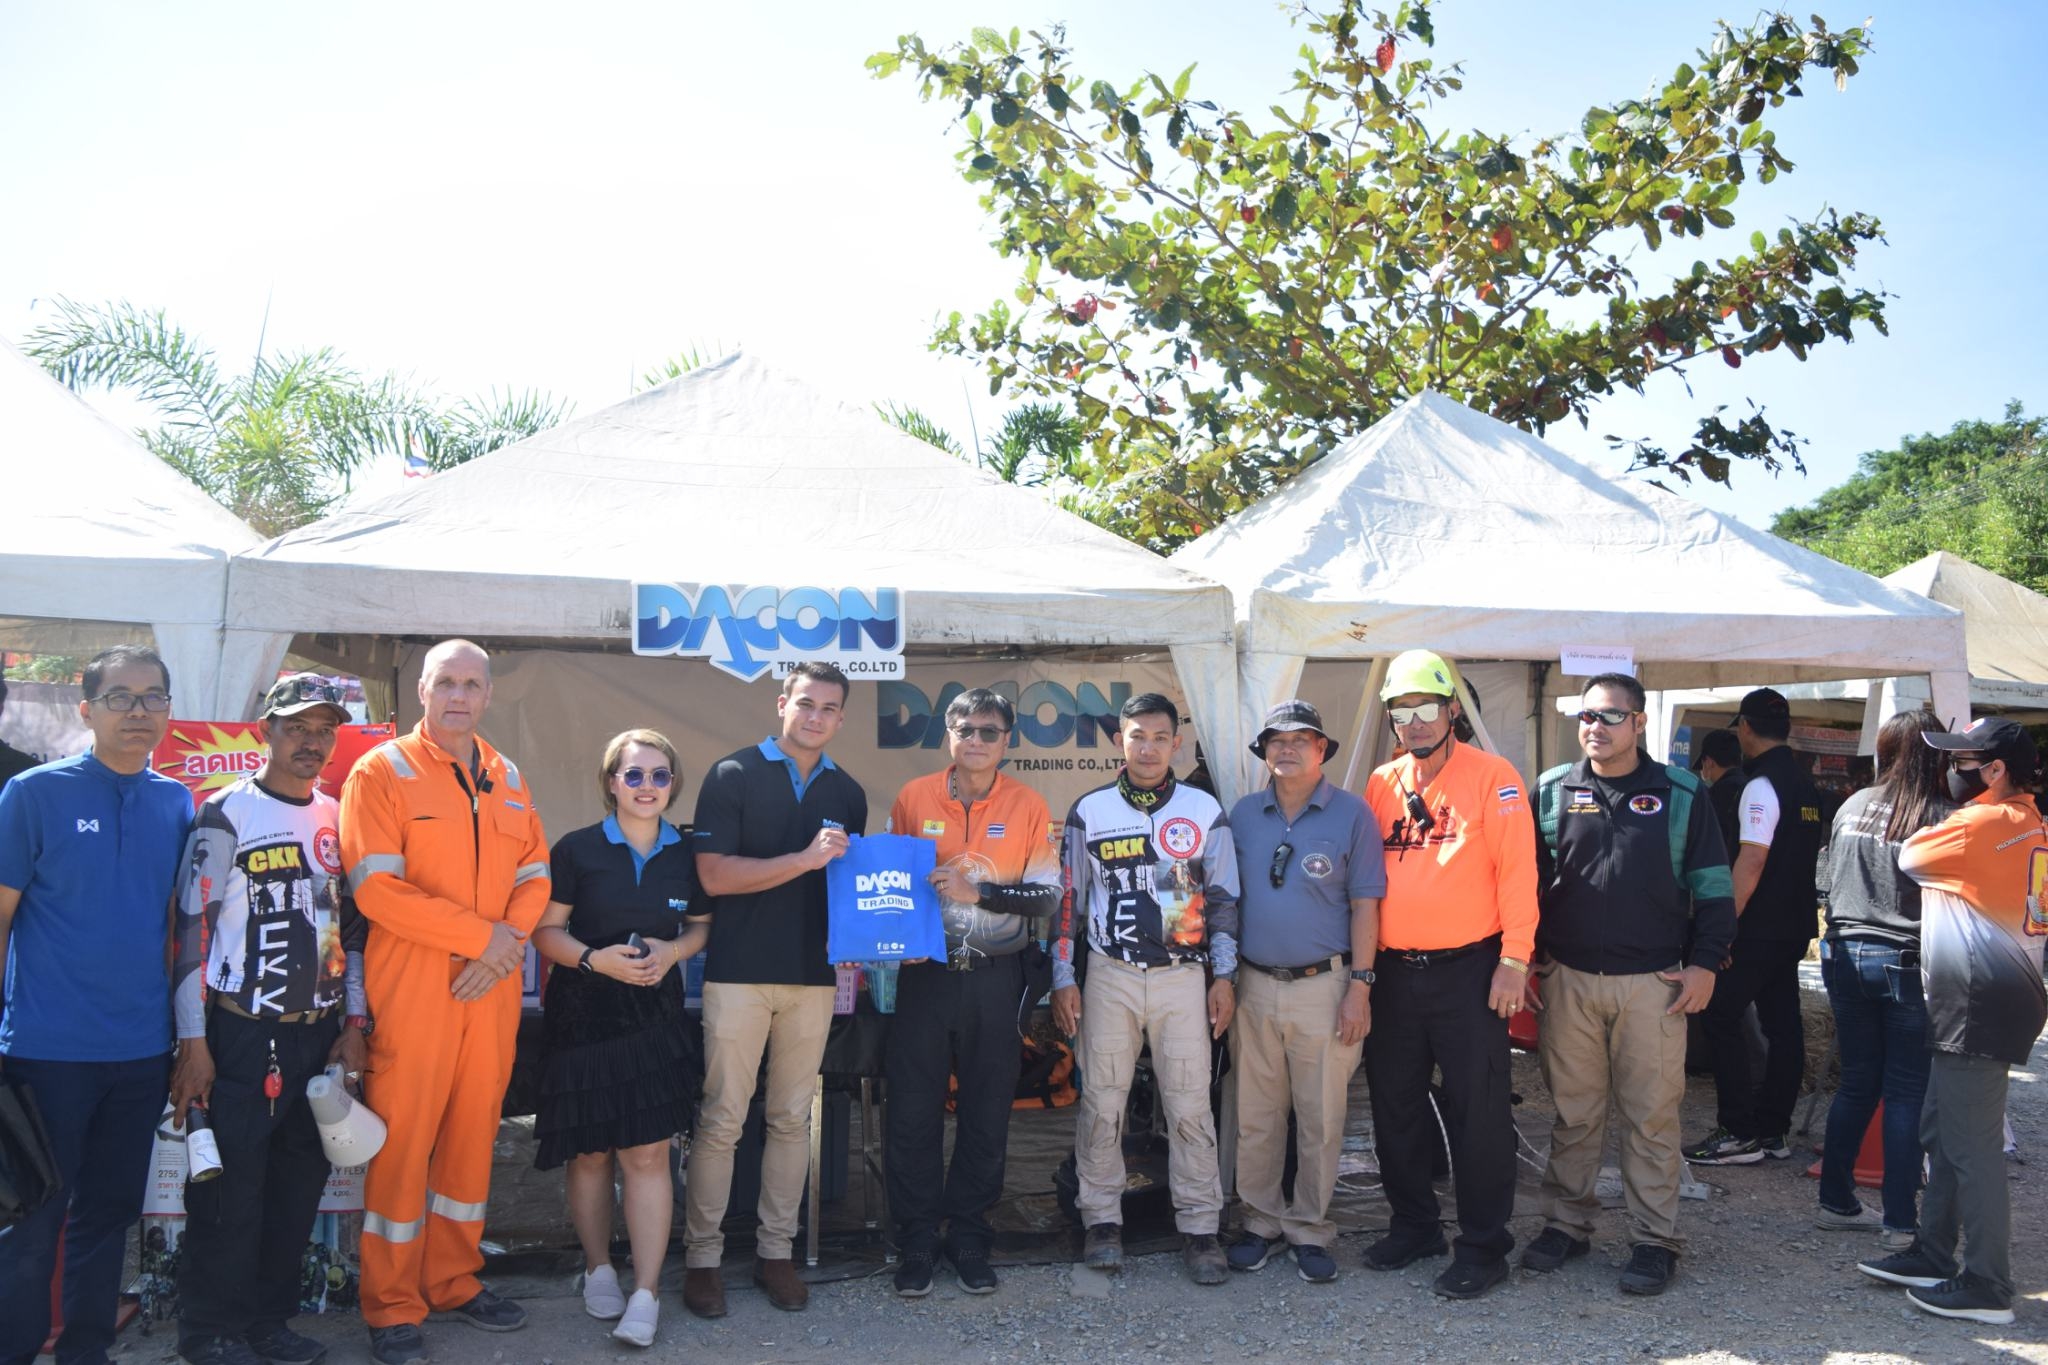 Sandy and Dacon Trading present their products to 1,000 rescue teams nationwide